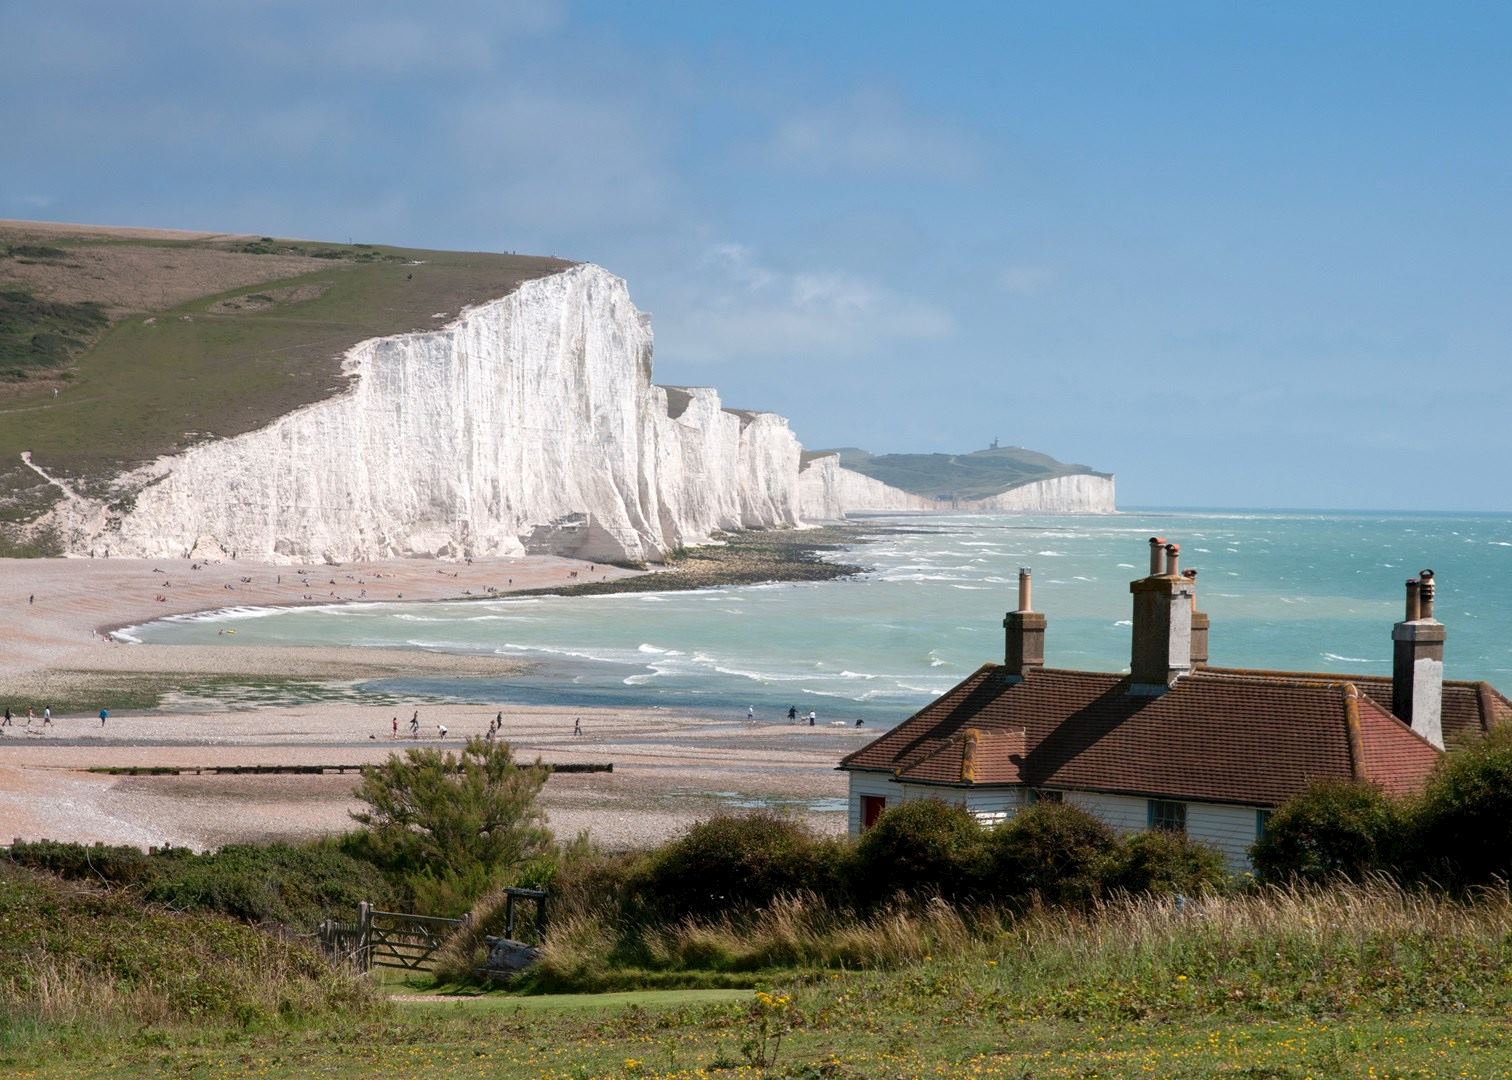 Visit The White Cliffs of Dover, England | Audley Travel